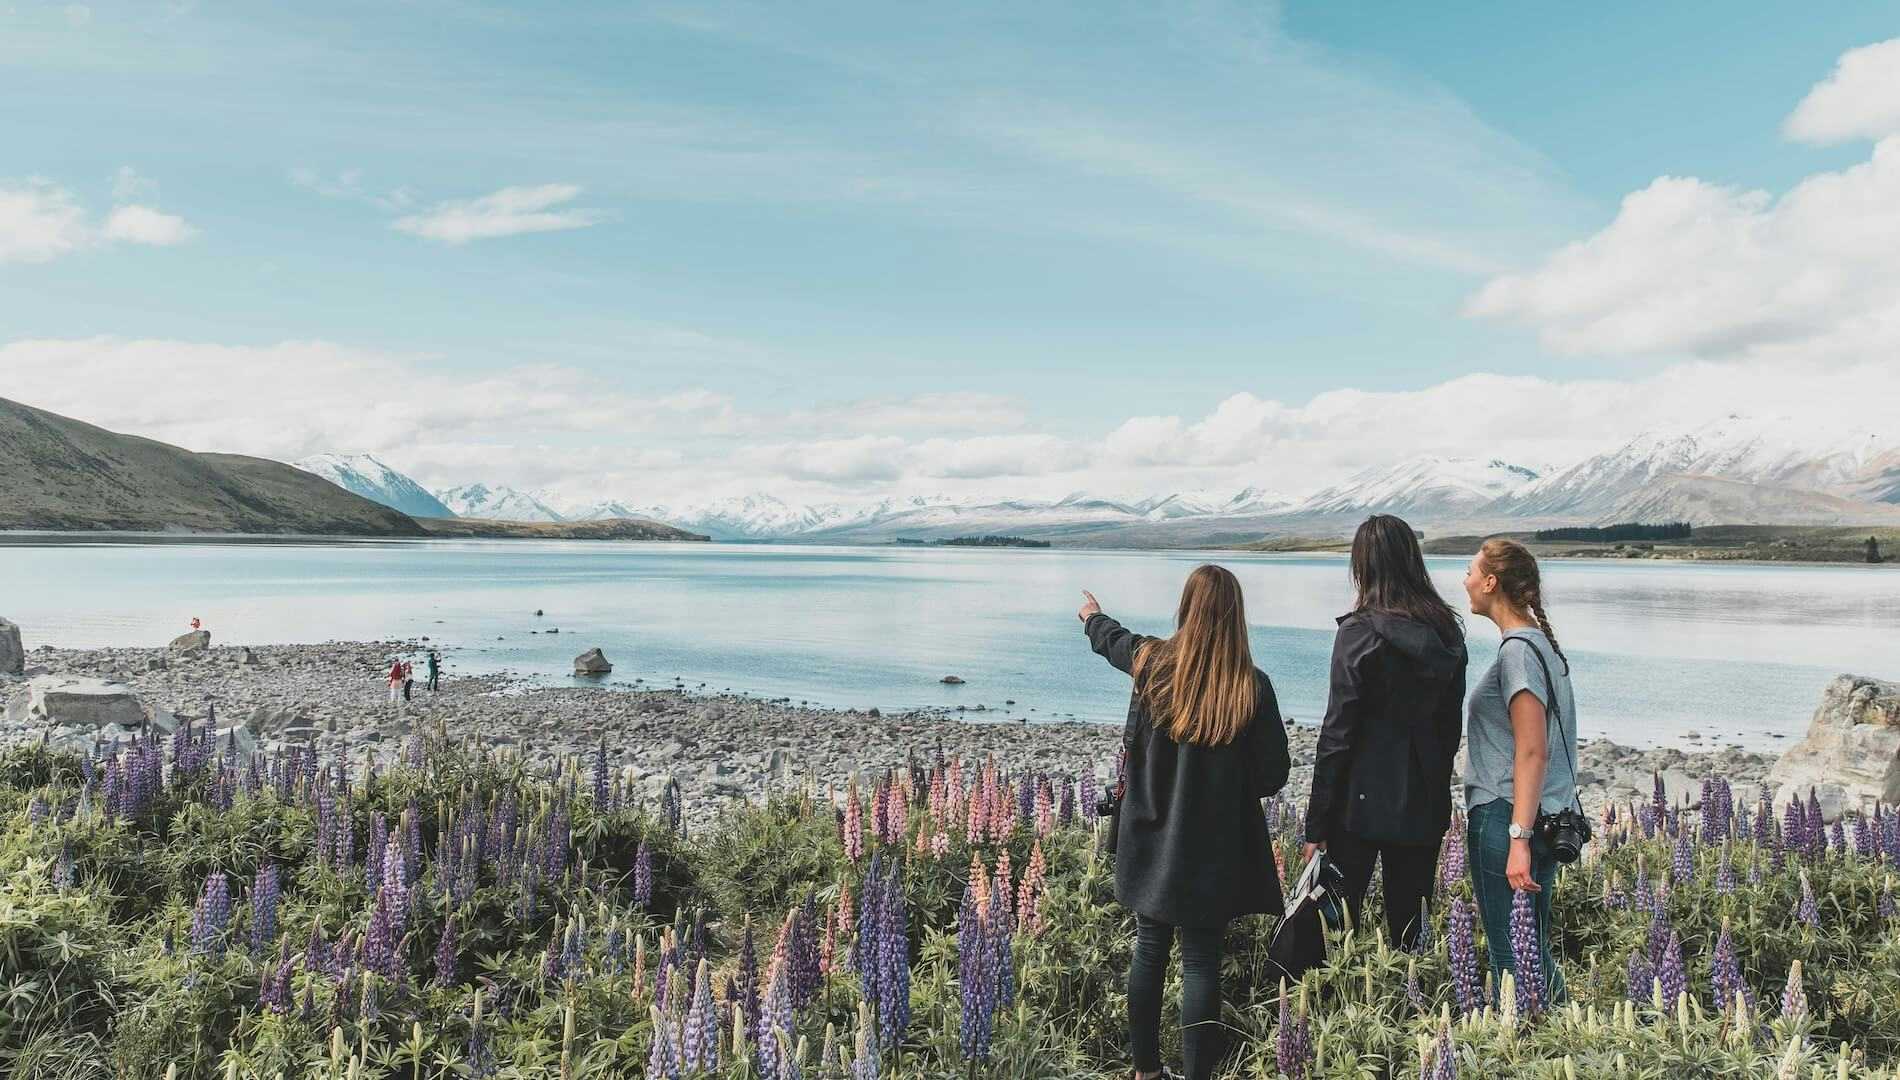 Three female travellers stand at Lake Tekapo looking out over snowy mountains surrounded by lupins during winter in New Zealand.